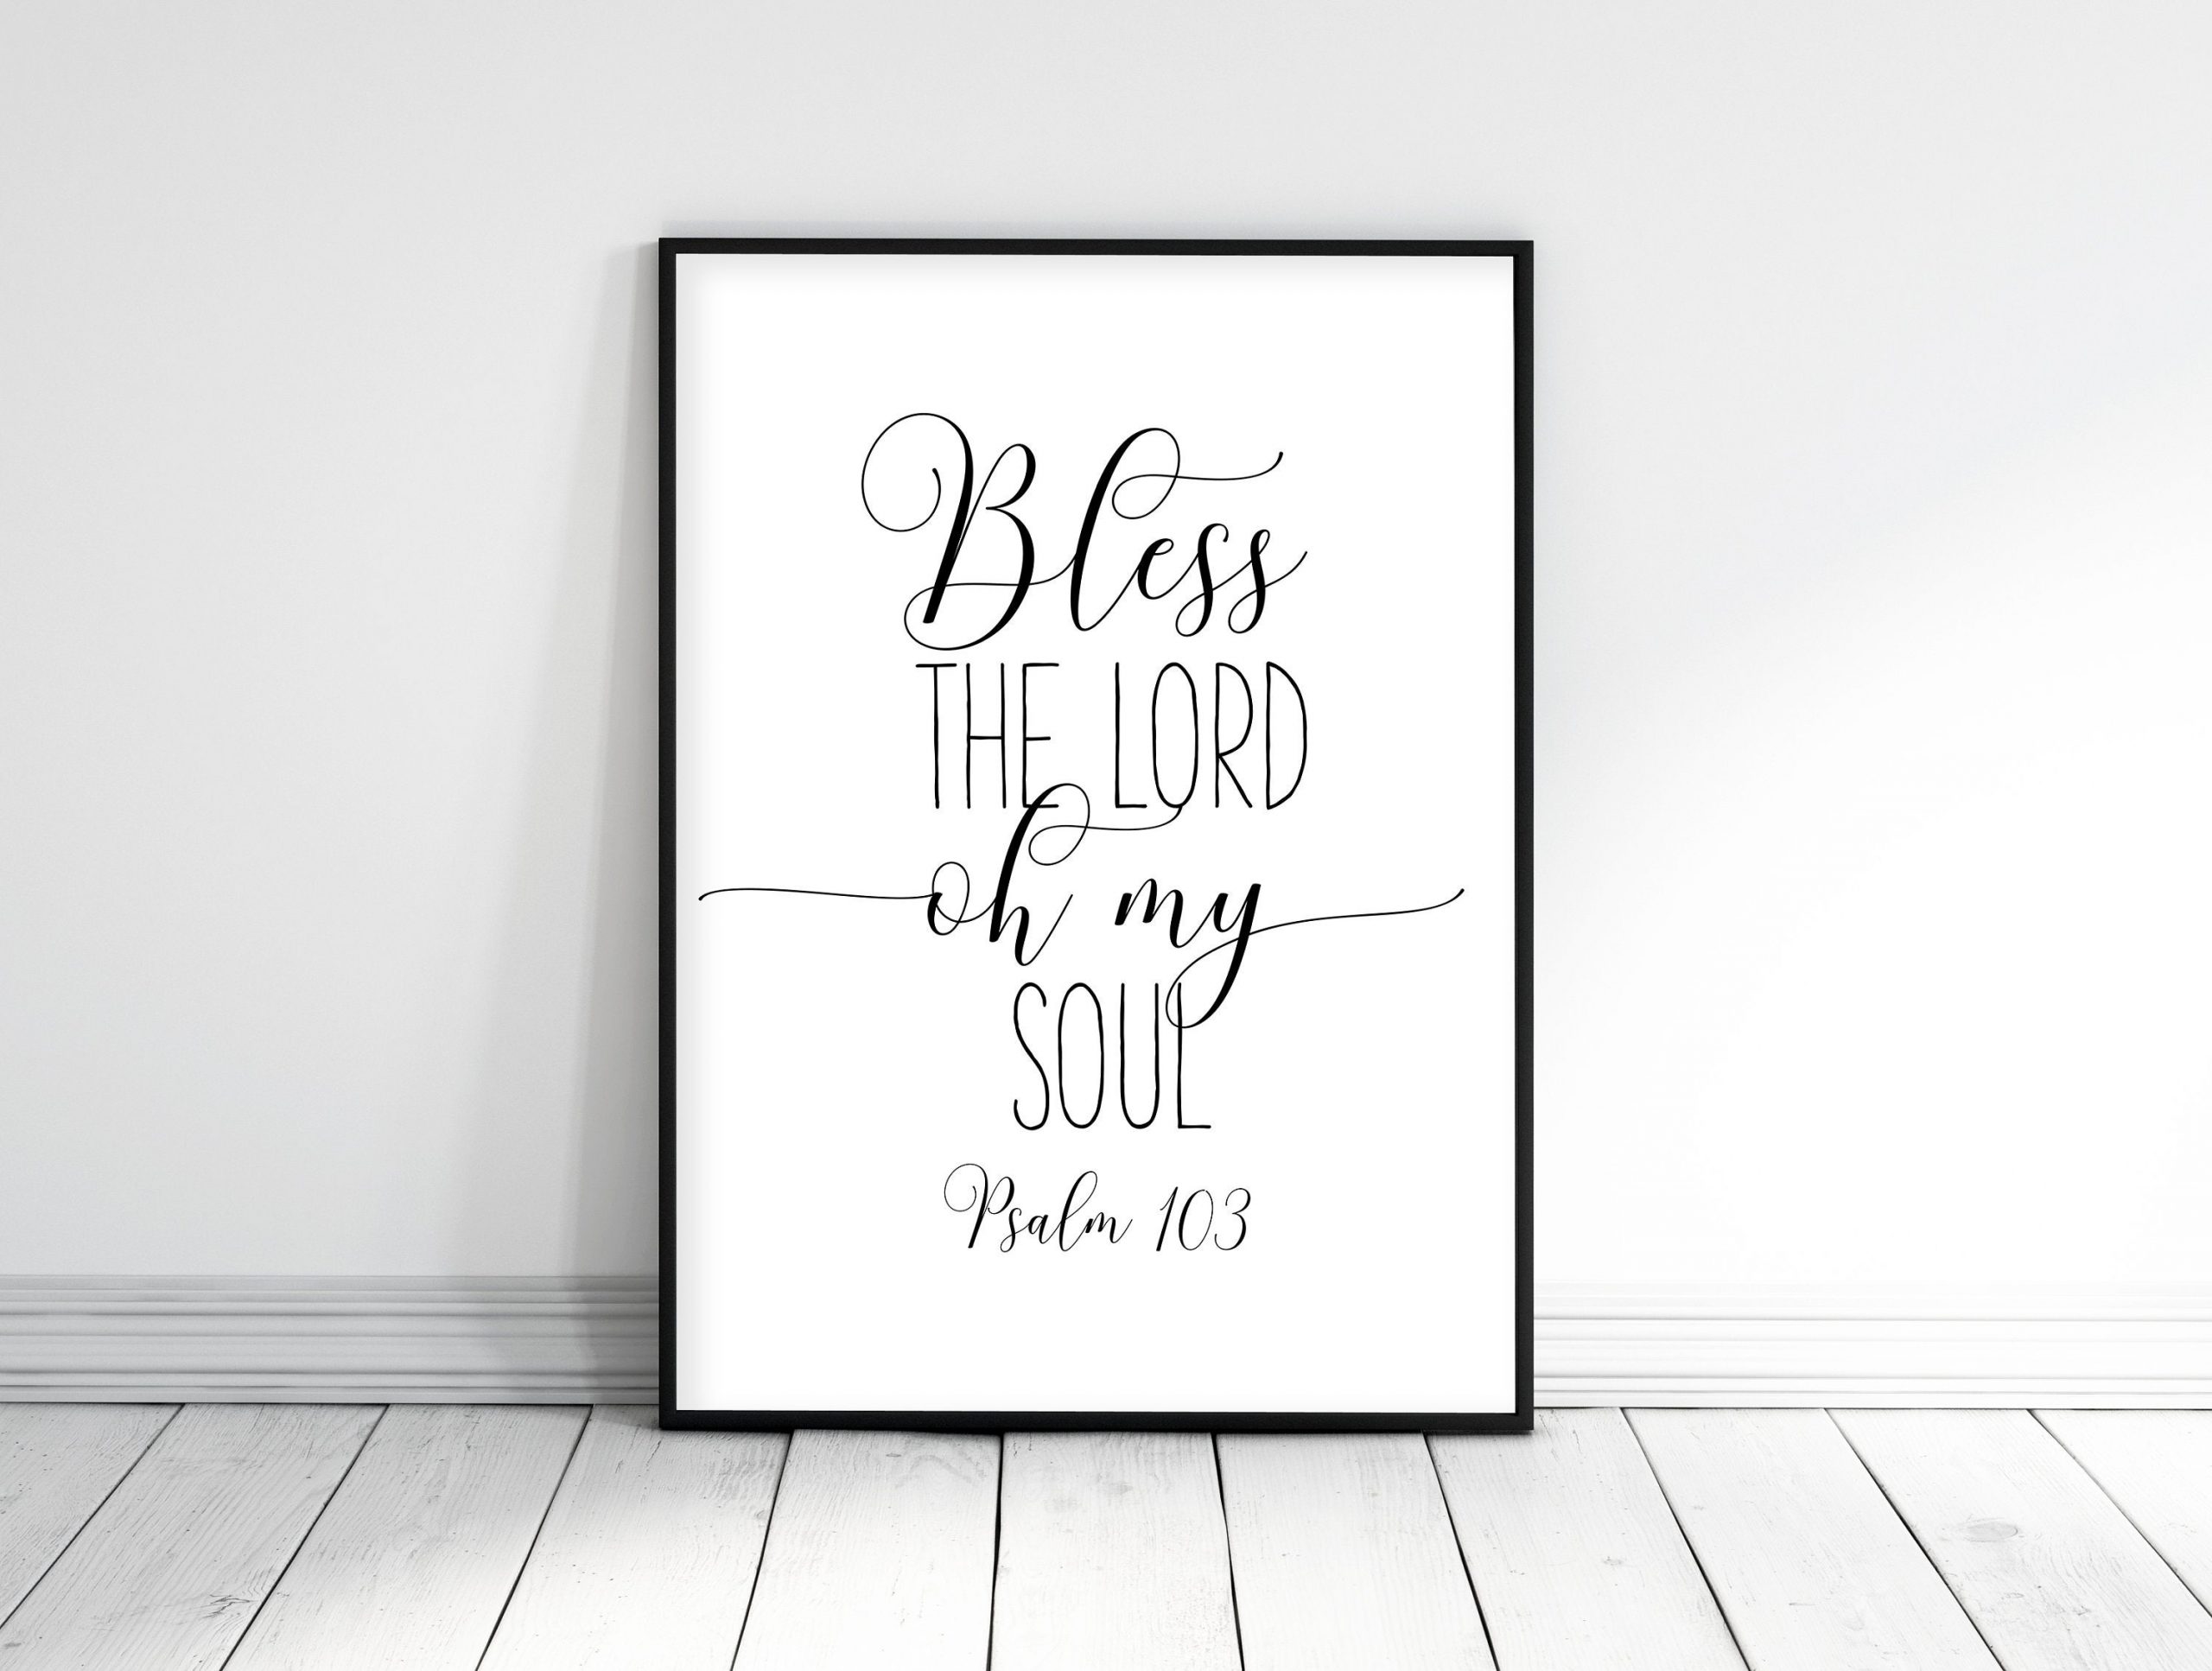 Bible Verse Art Bless The Lord Oh My Soul, Psalm 103, Scripture Quote, Nursery Wall Art Scripture